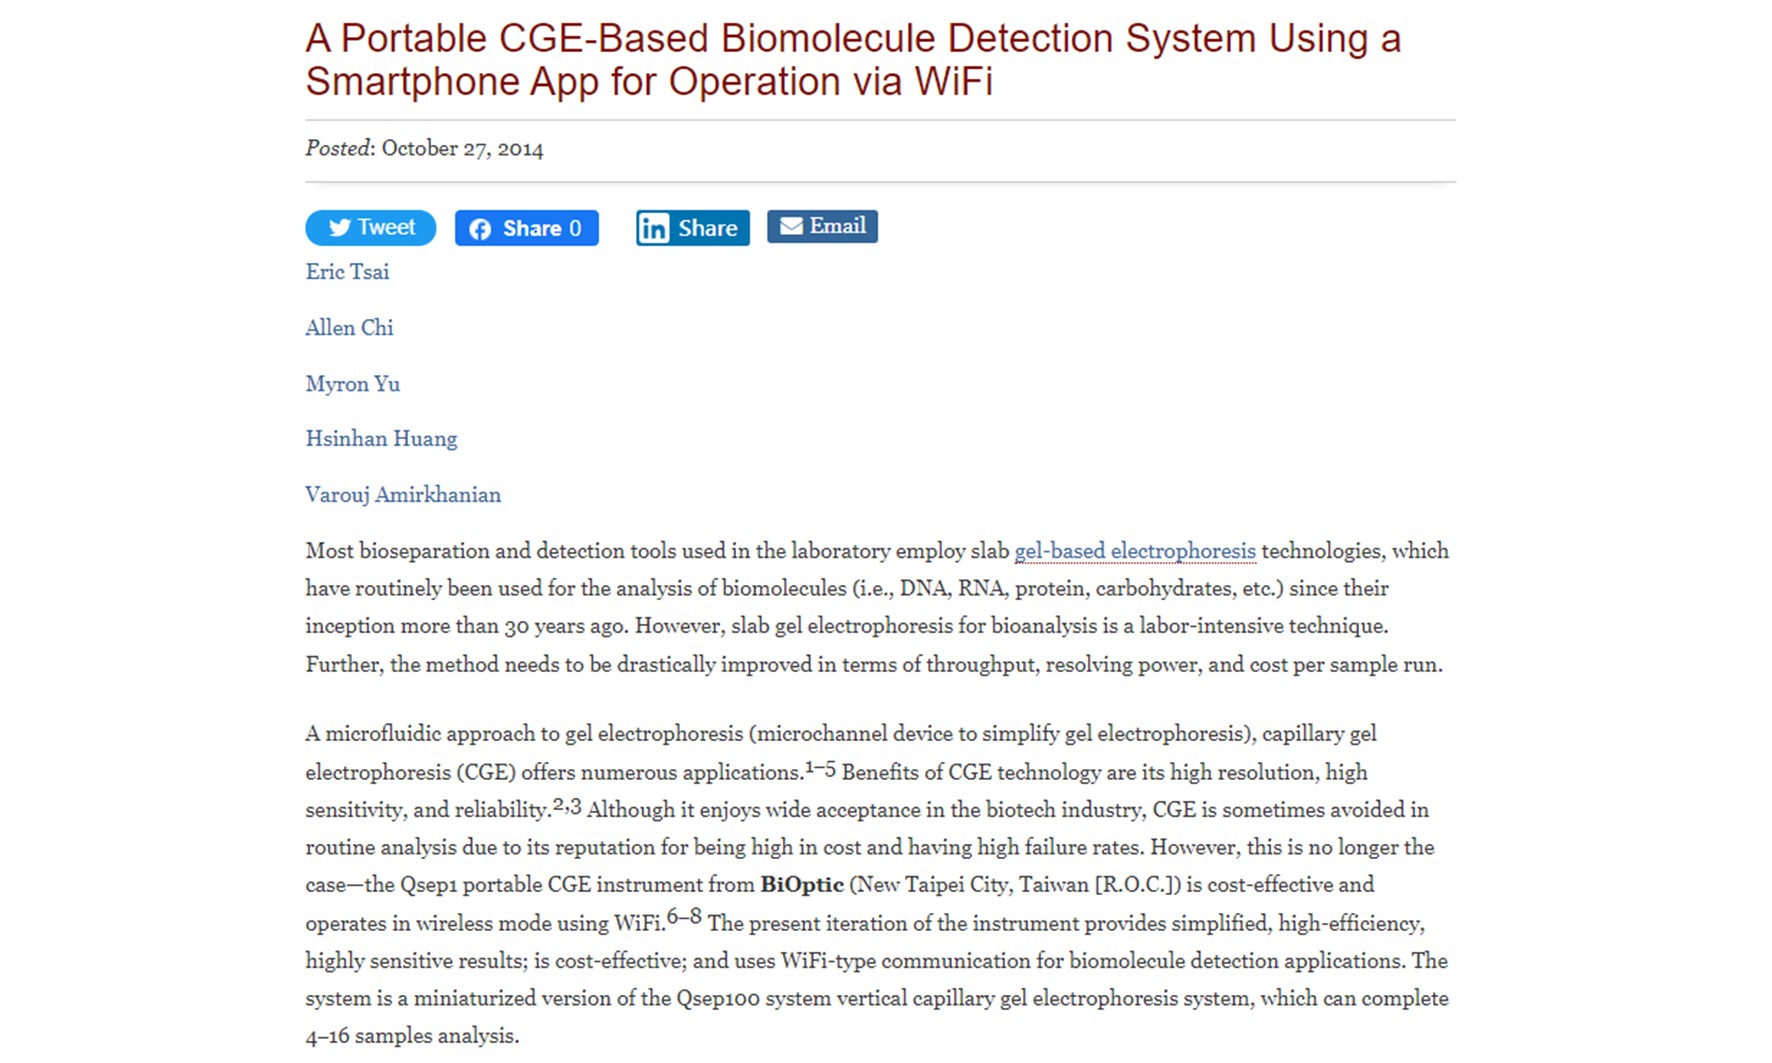 A Portable CGE-Based Biomolecule Detection System Using a Smartphone App for Operation via WiFi